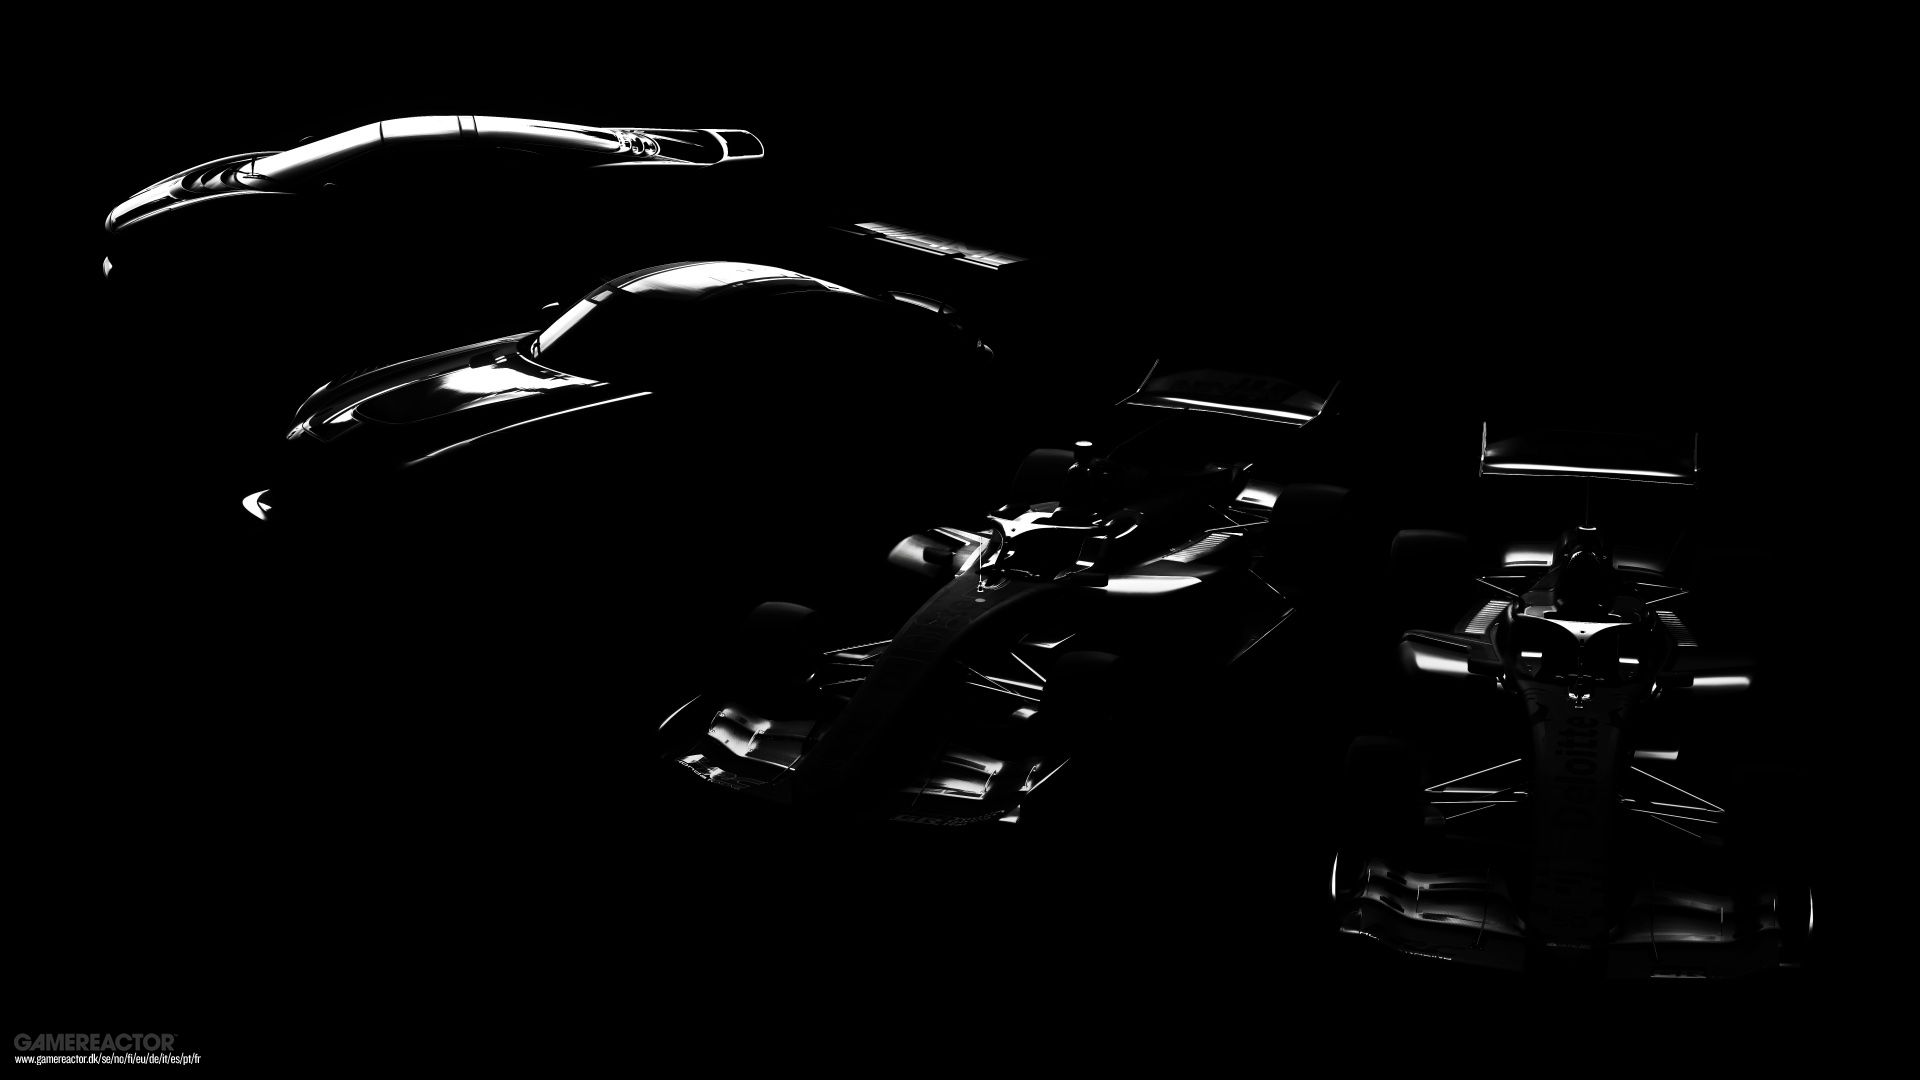 Yamauchi predicts that we will have four new cars this week in Gran Turismo 7